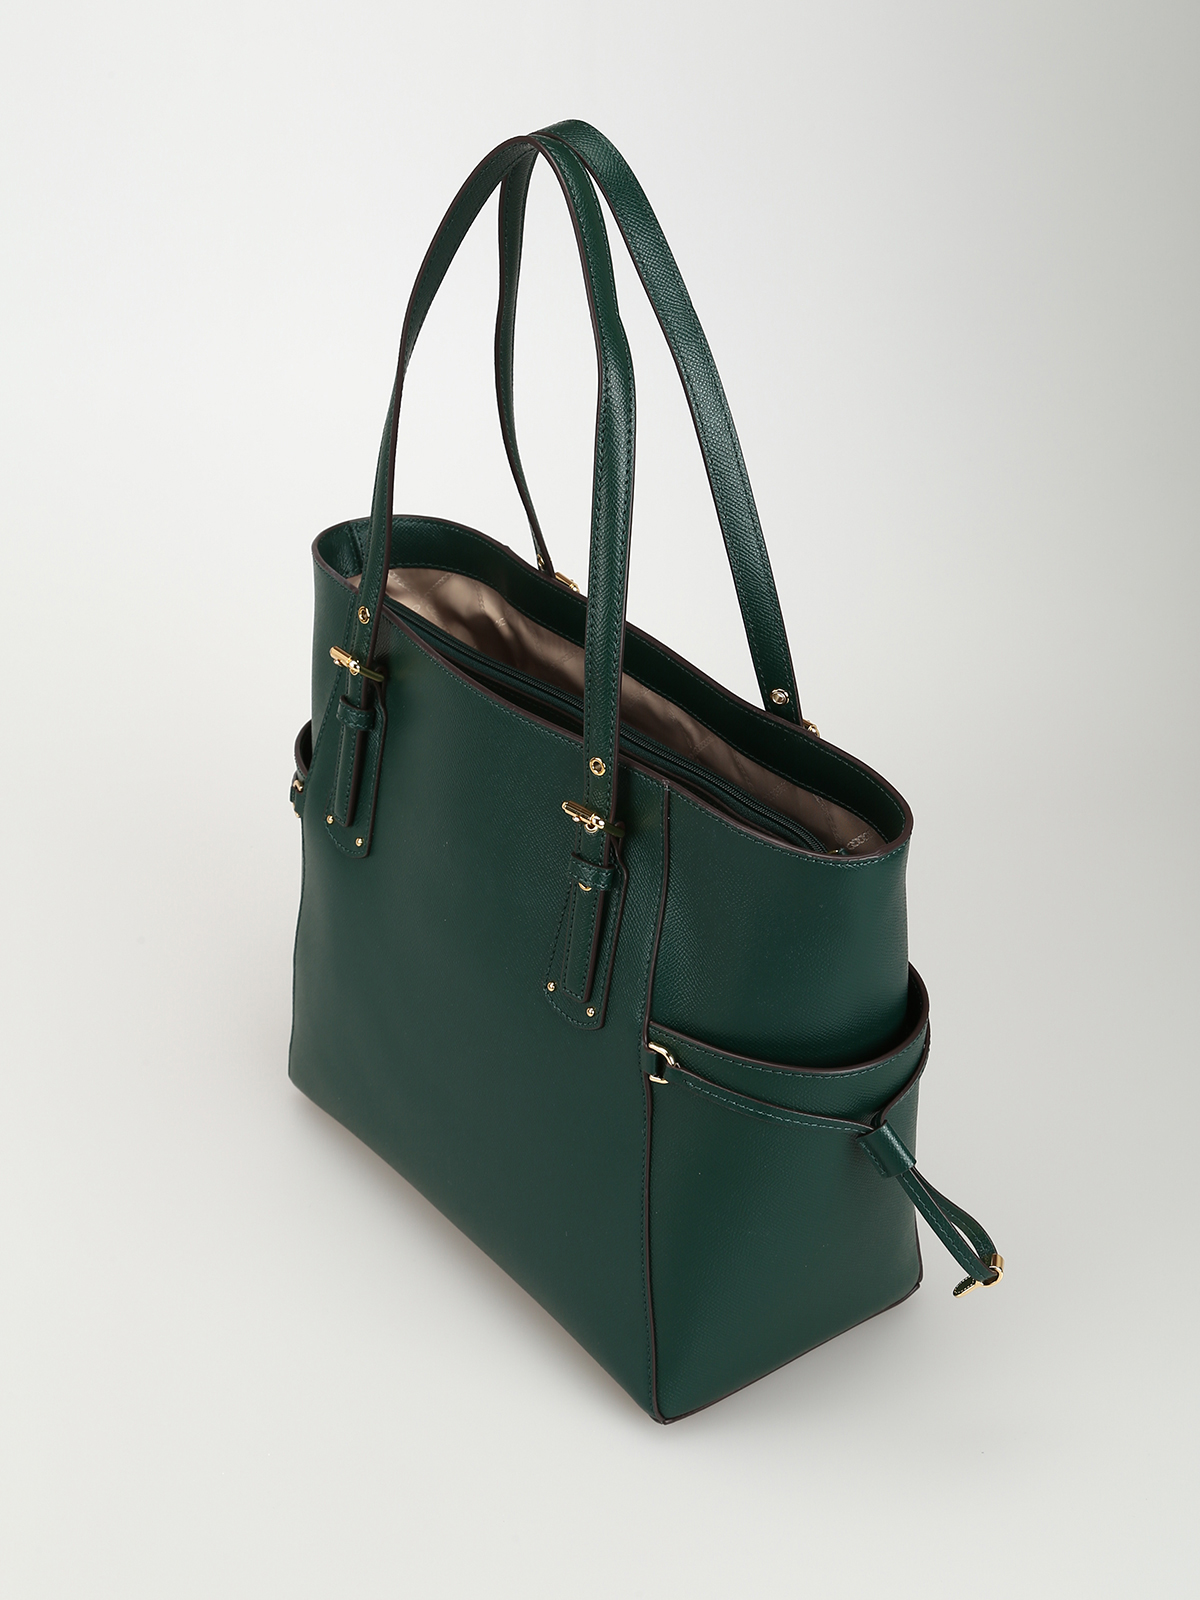 Glimmer Dark Green Women Hand Bag in Mehsana at best price by New Star Bags  - Justdial